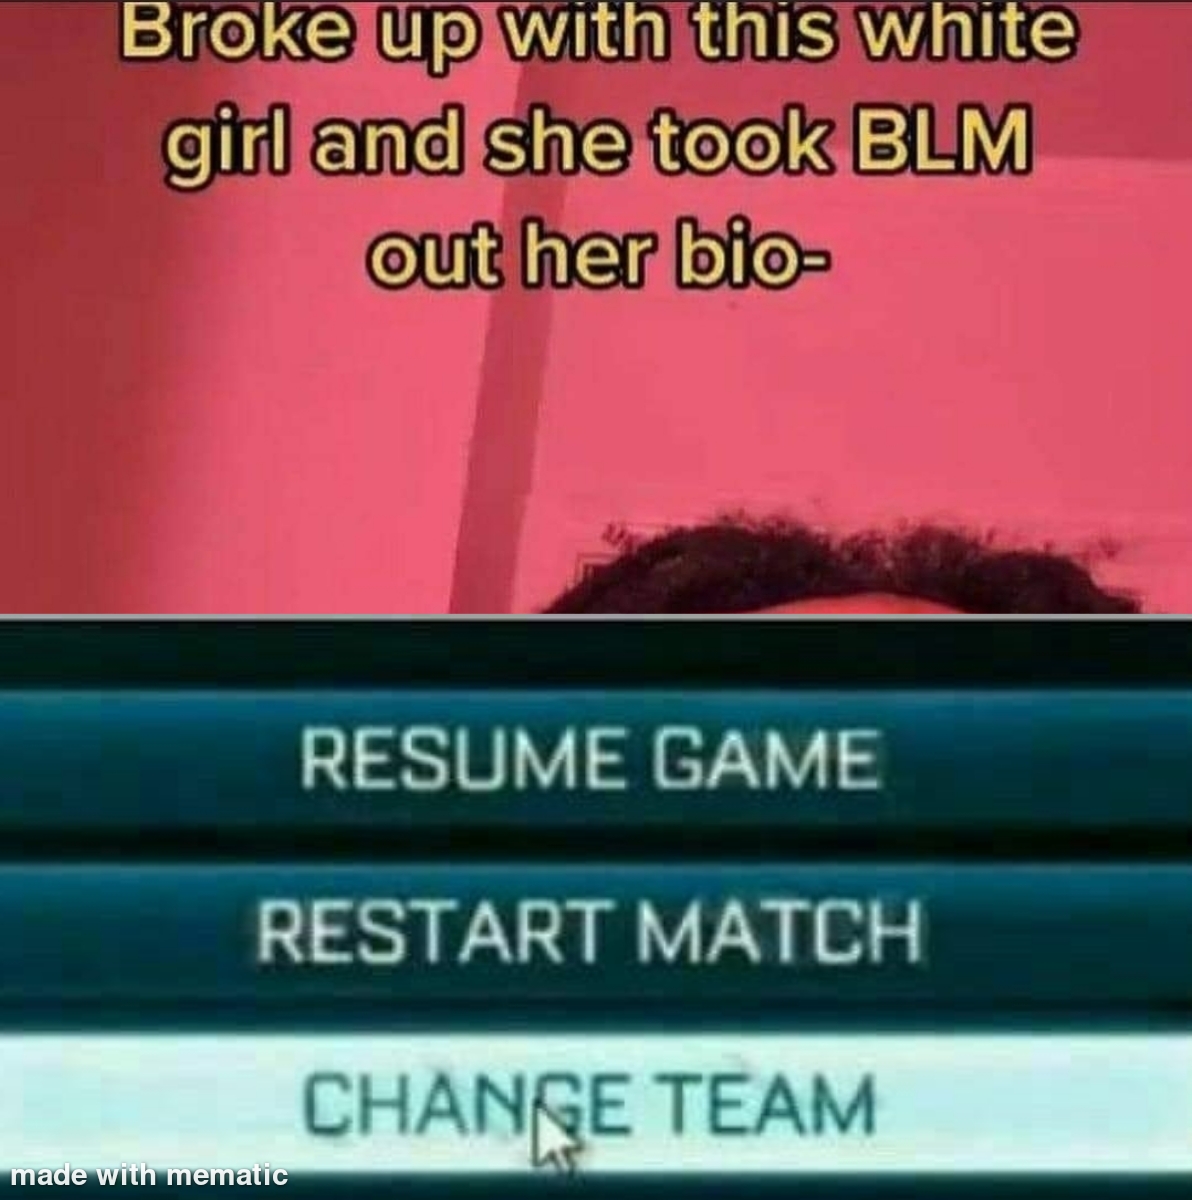 funny gaming memes - material - Broke up with this white girl and she took Blm out her bio Resume Game Restart Match Change Team made with mematic